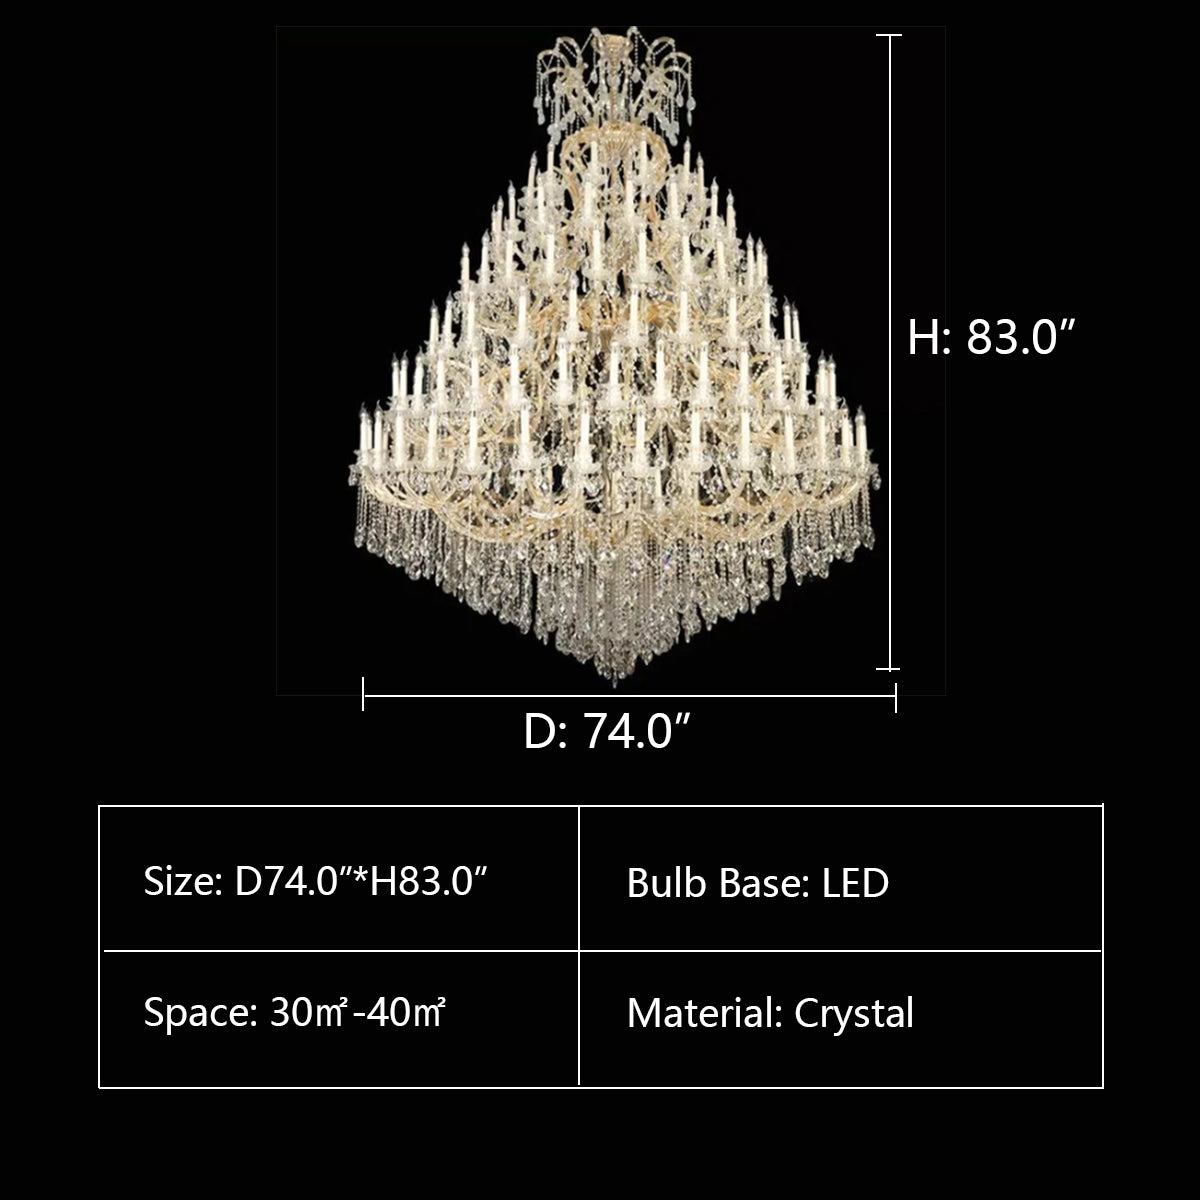 D74.0"*H83.0" 66L Rococo Foyer Classic Crystal Chandelier,chandelier,chandeliers,crystal,candle,pendant,raindrop,teardrop,layers,tiers,traditional,classical,extra large,large,oversized,huge,big,long,stairs,entrys,foyer,duplex hall,living room